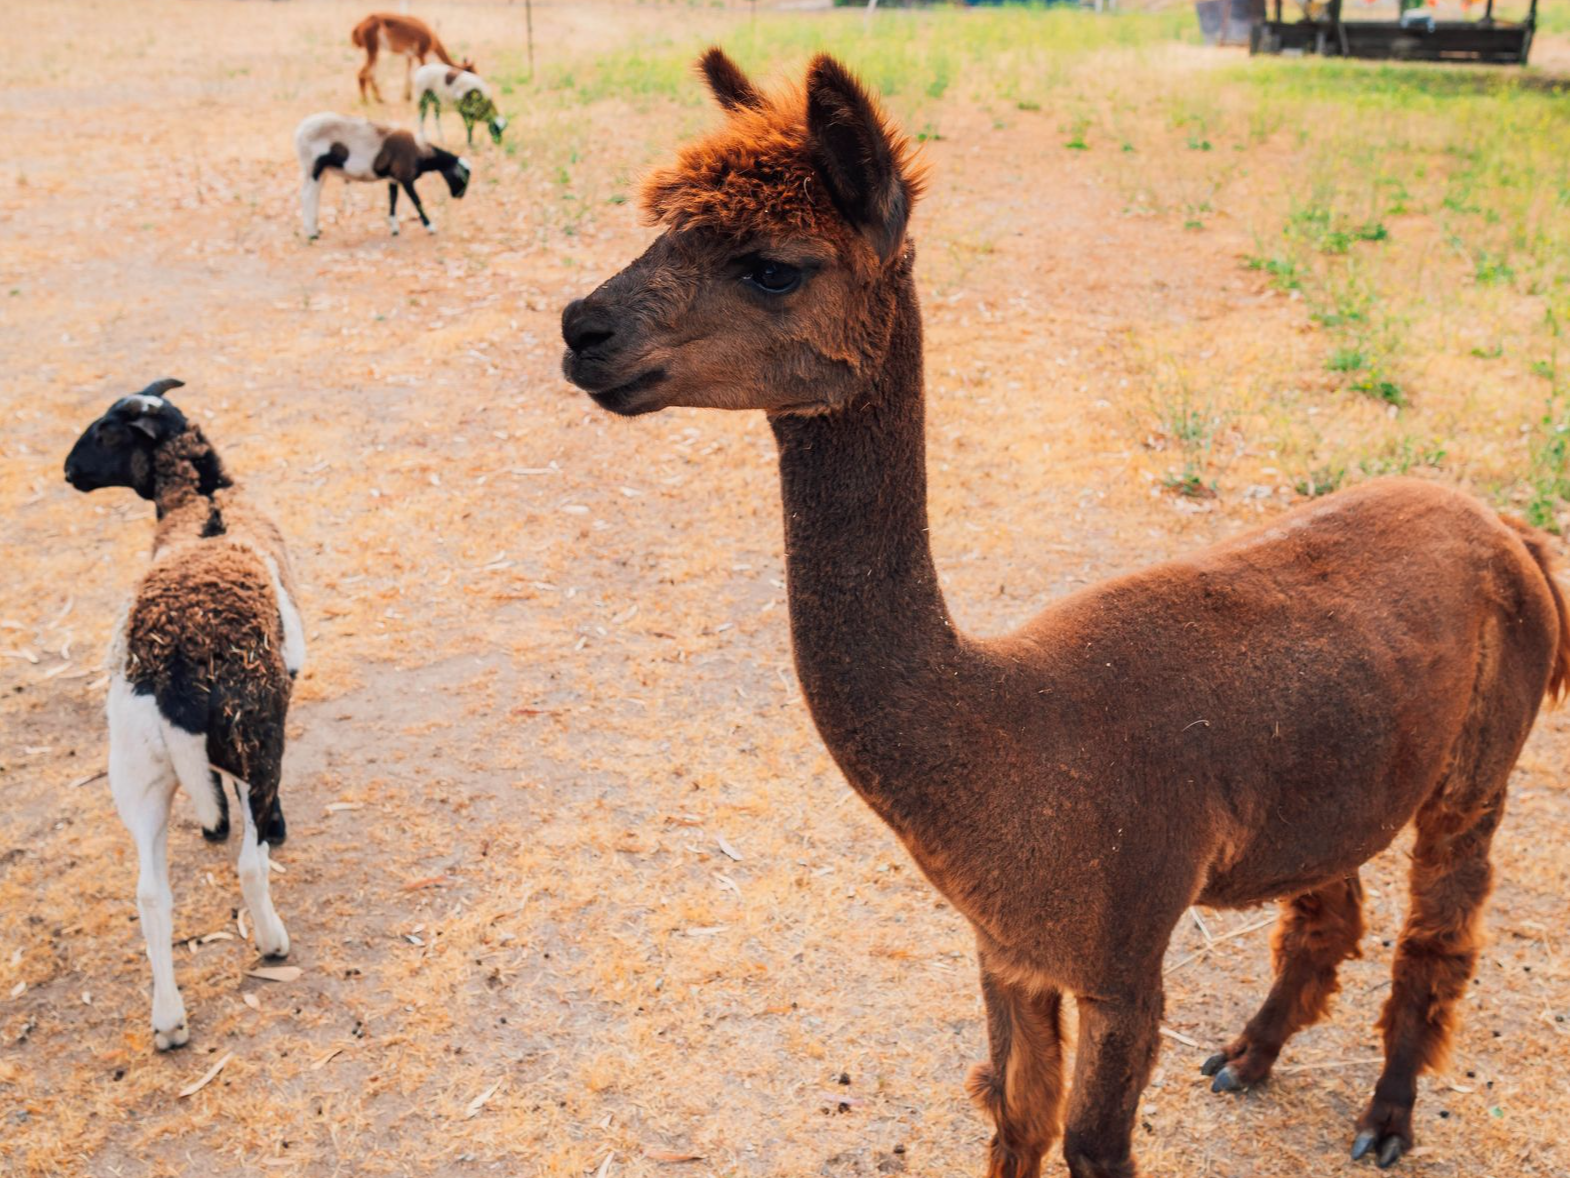 George, the Alpaca, and goats in the background